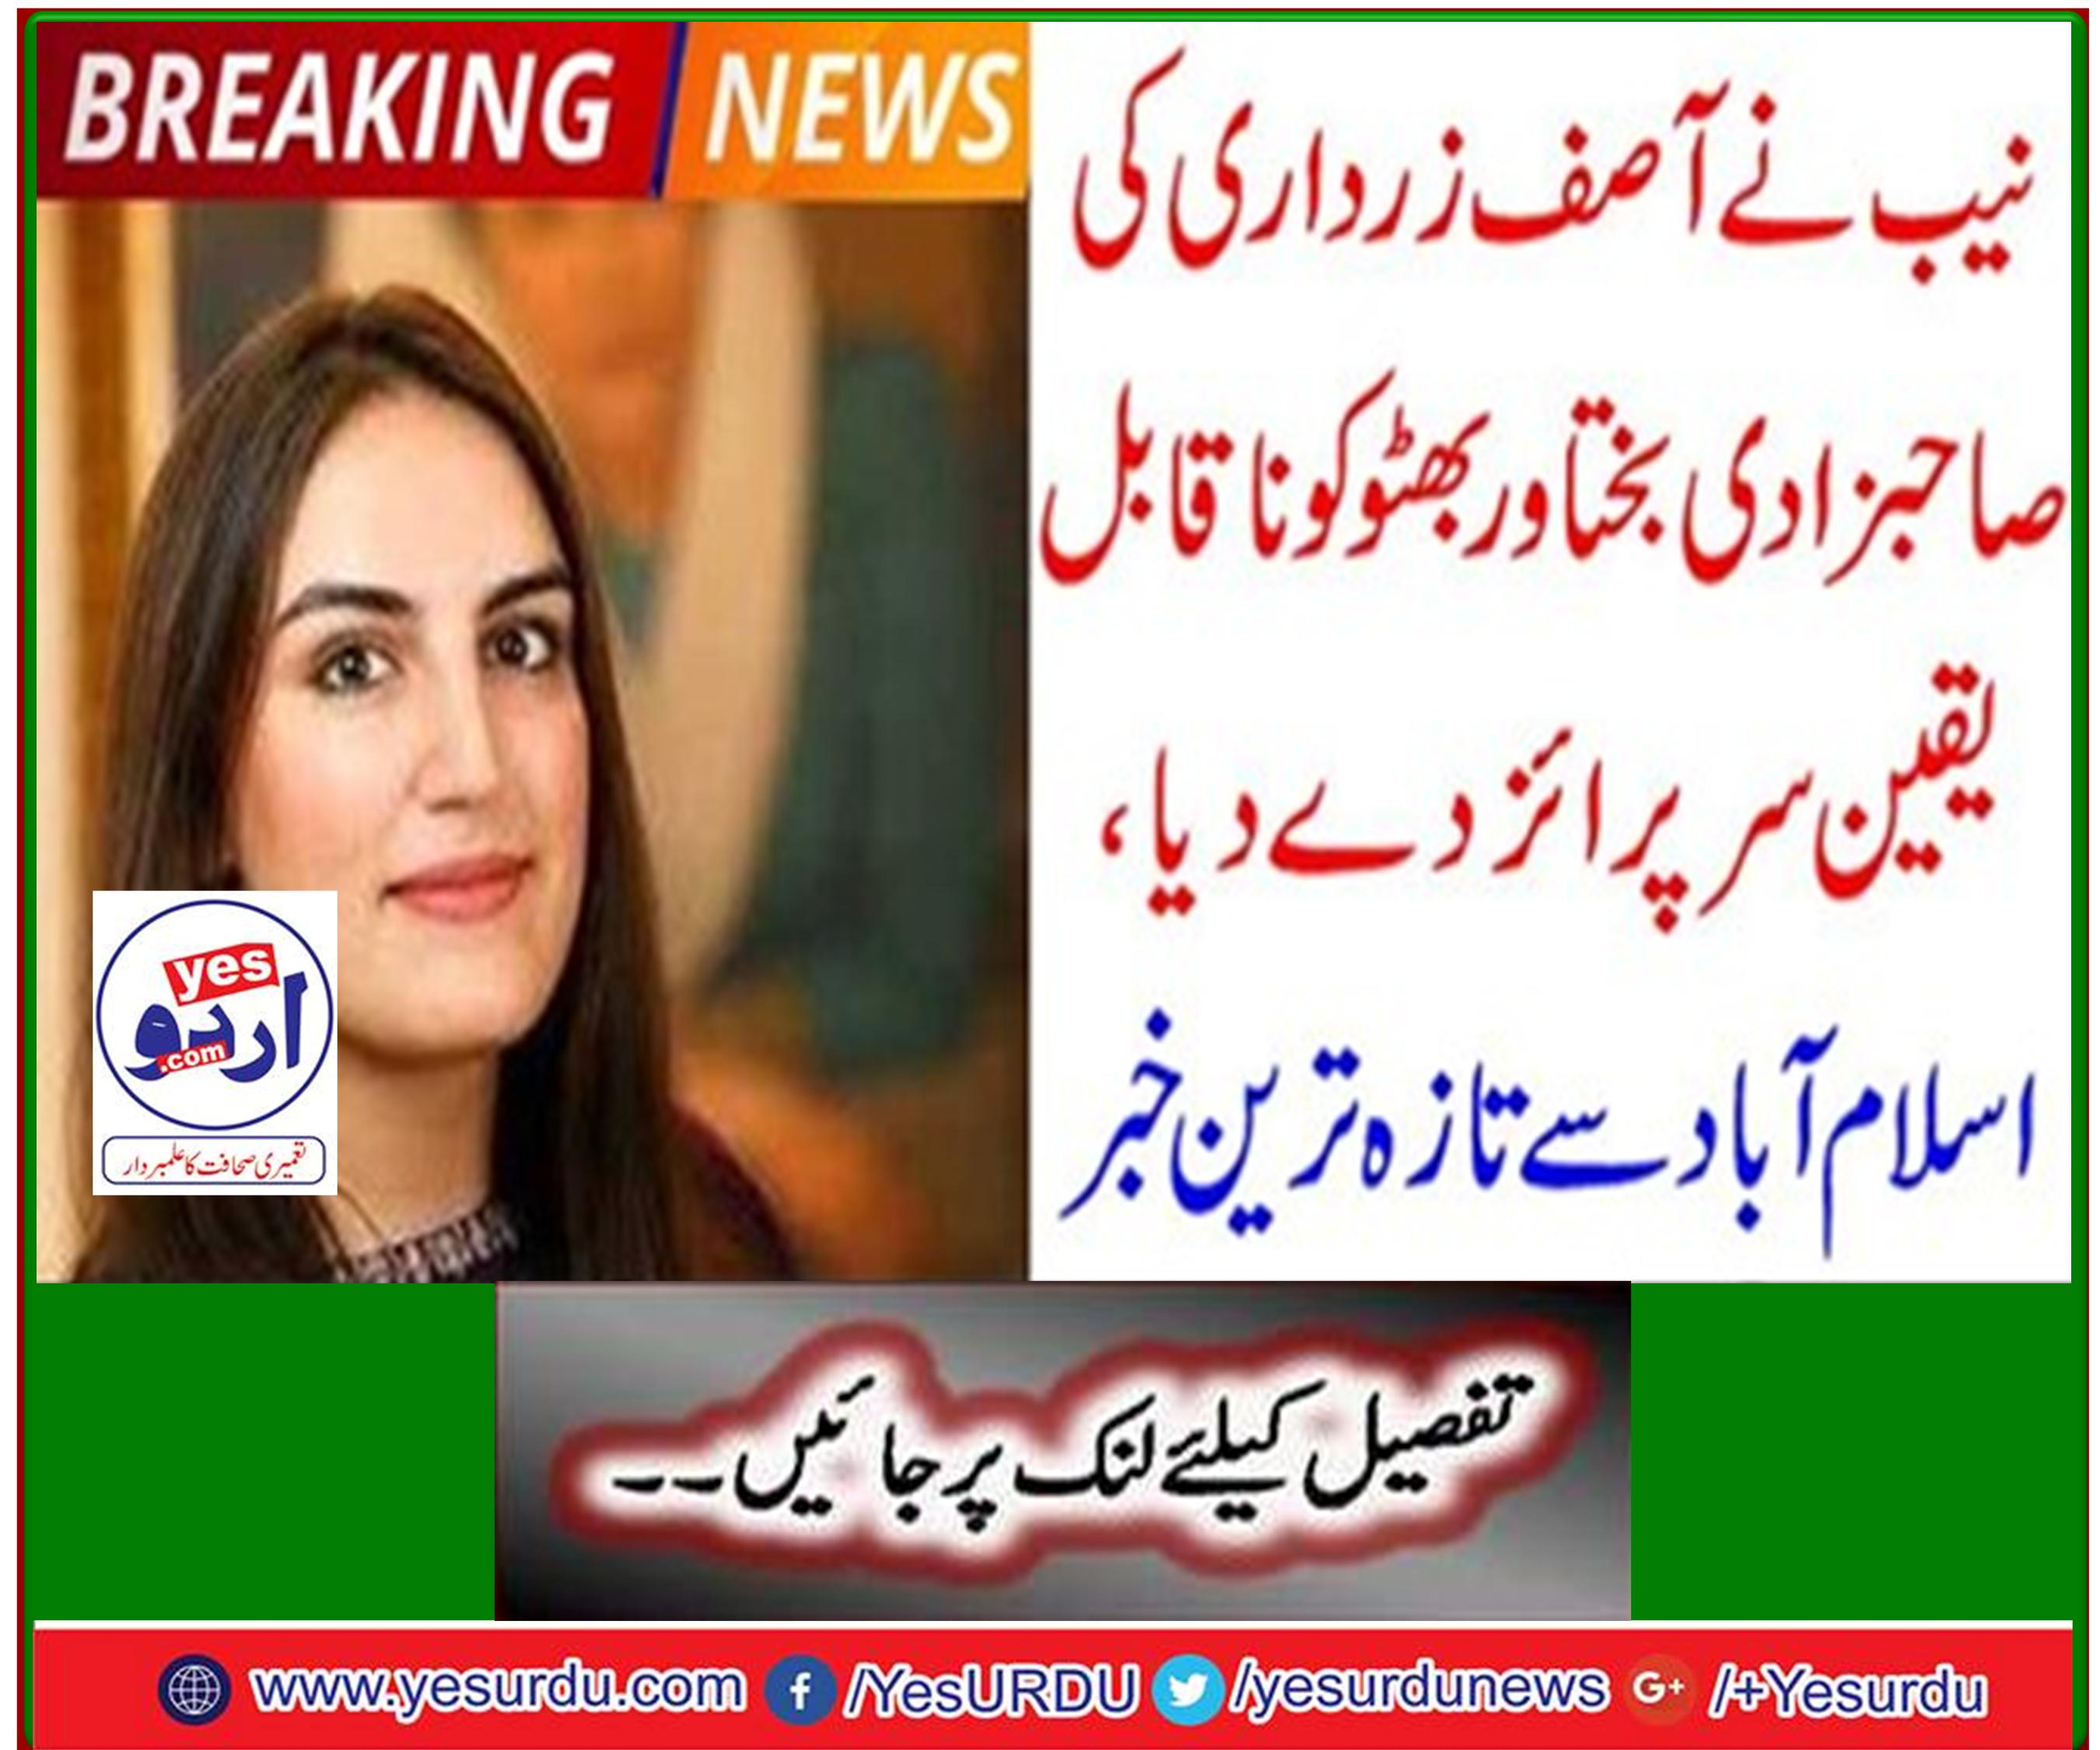 Breaking News: NAB gives incredible honor to Asif Zardari's daughter, Bakhtawar Bhutto, latest news from Islamabad